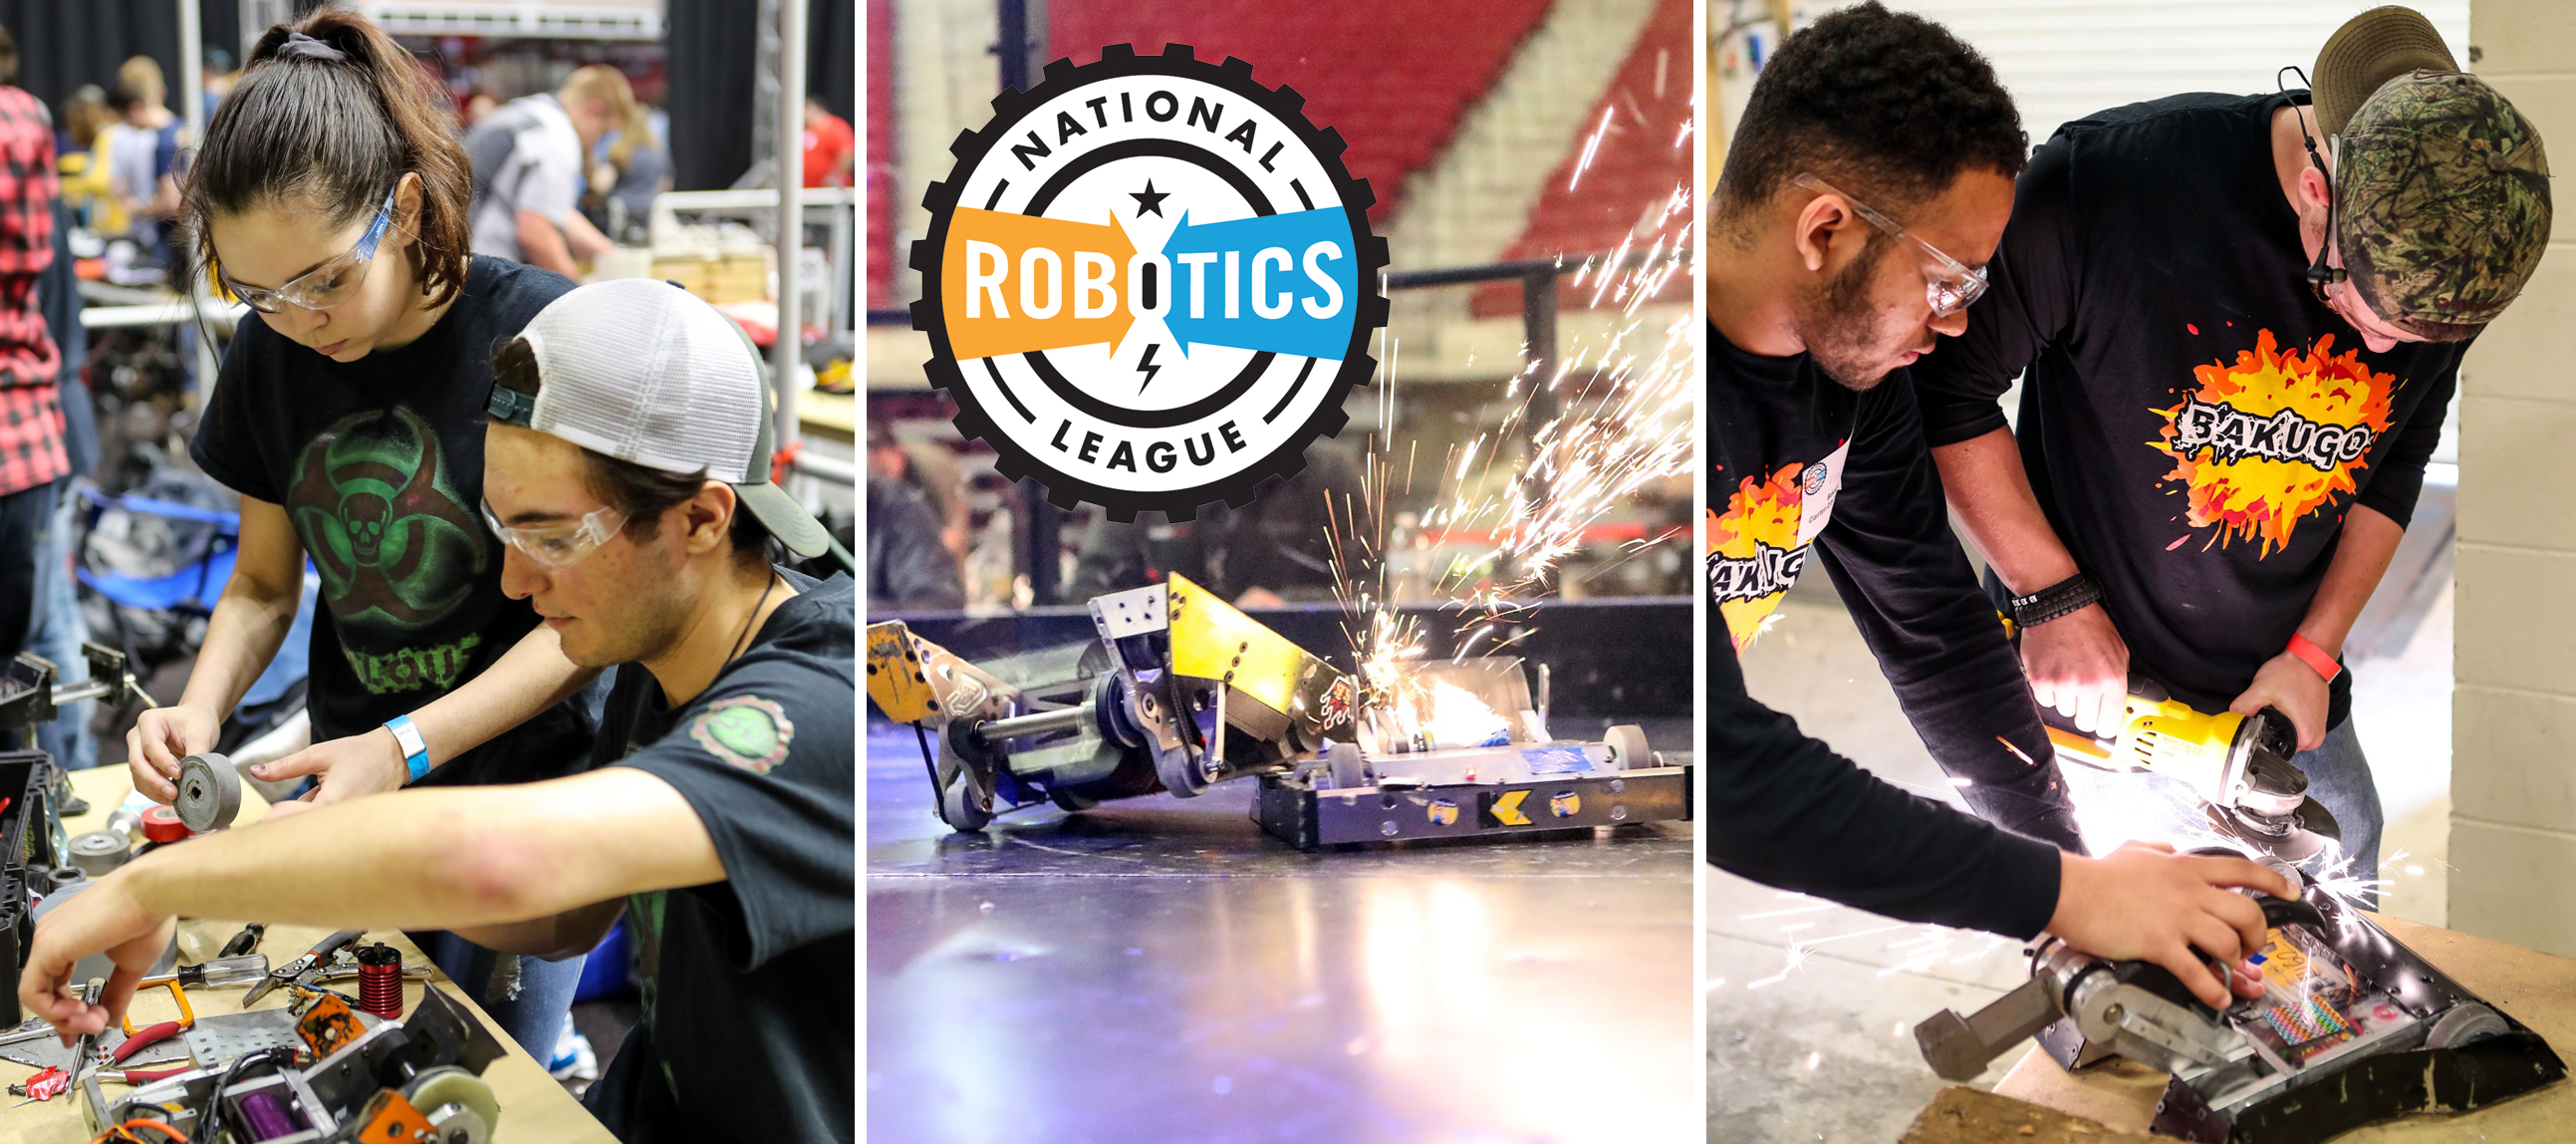 Big Kaiser's 5th annual promotion to support workforce development and STEM through the National Robotics League.